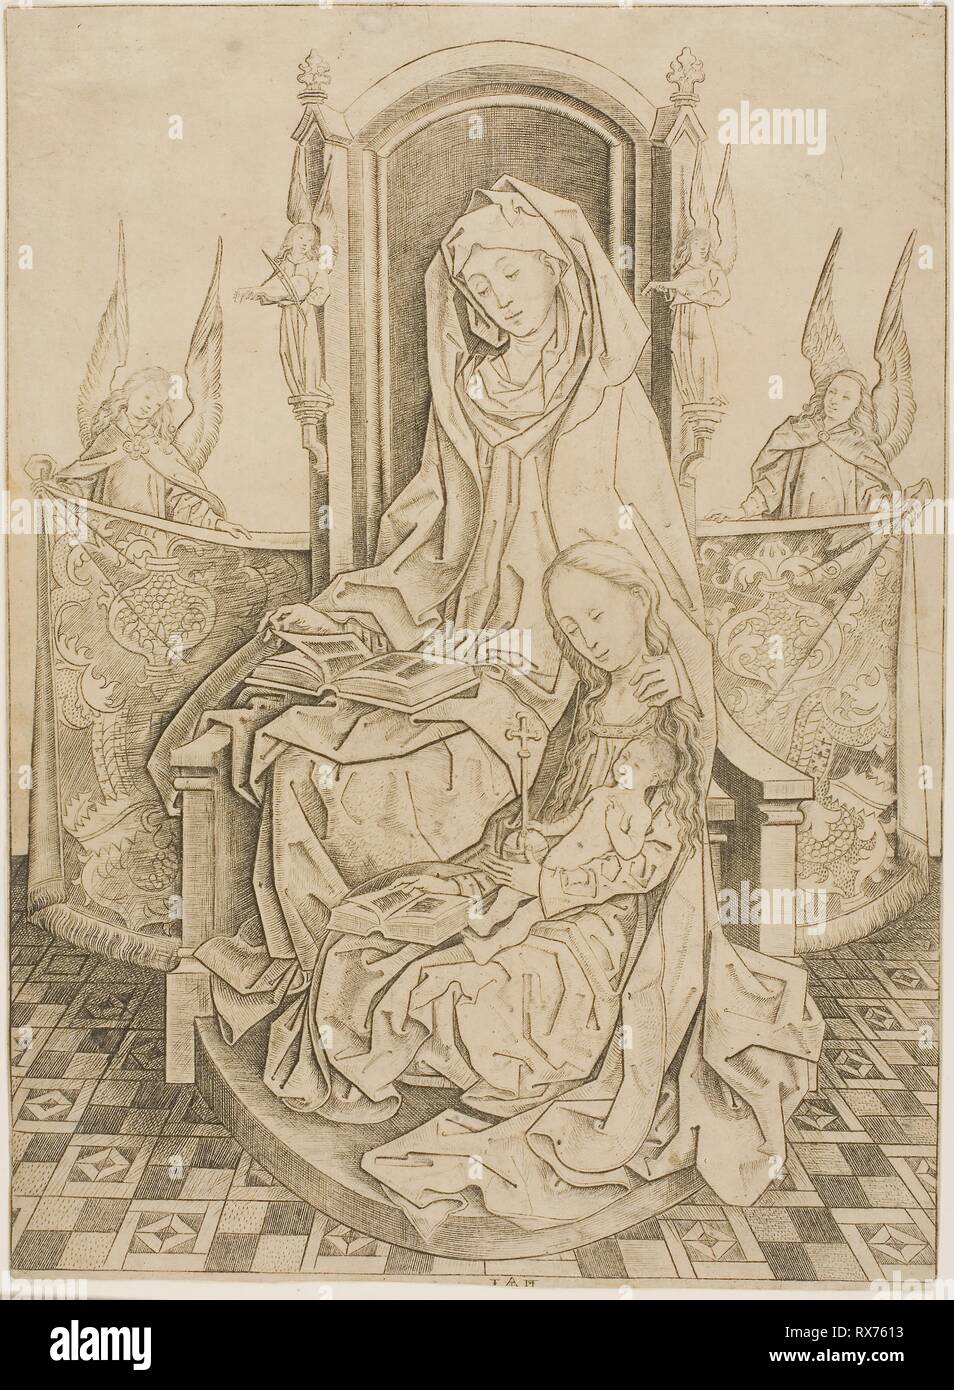 St. Anne, The Virgin and Child. Master I.A.M. of Zwolle; Netherlandish, active c. 1470-95. Date: 1480-1490. Dimensions: 265 x 192 mm (plate); 267 x 193 mm (sheet). Engraving in black on paper. Origin: Netherlands. Museum: The Chicago Art Institute. Stock Photo